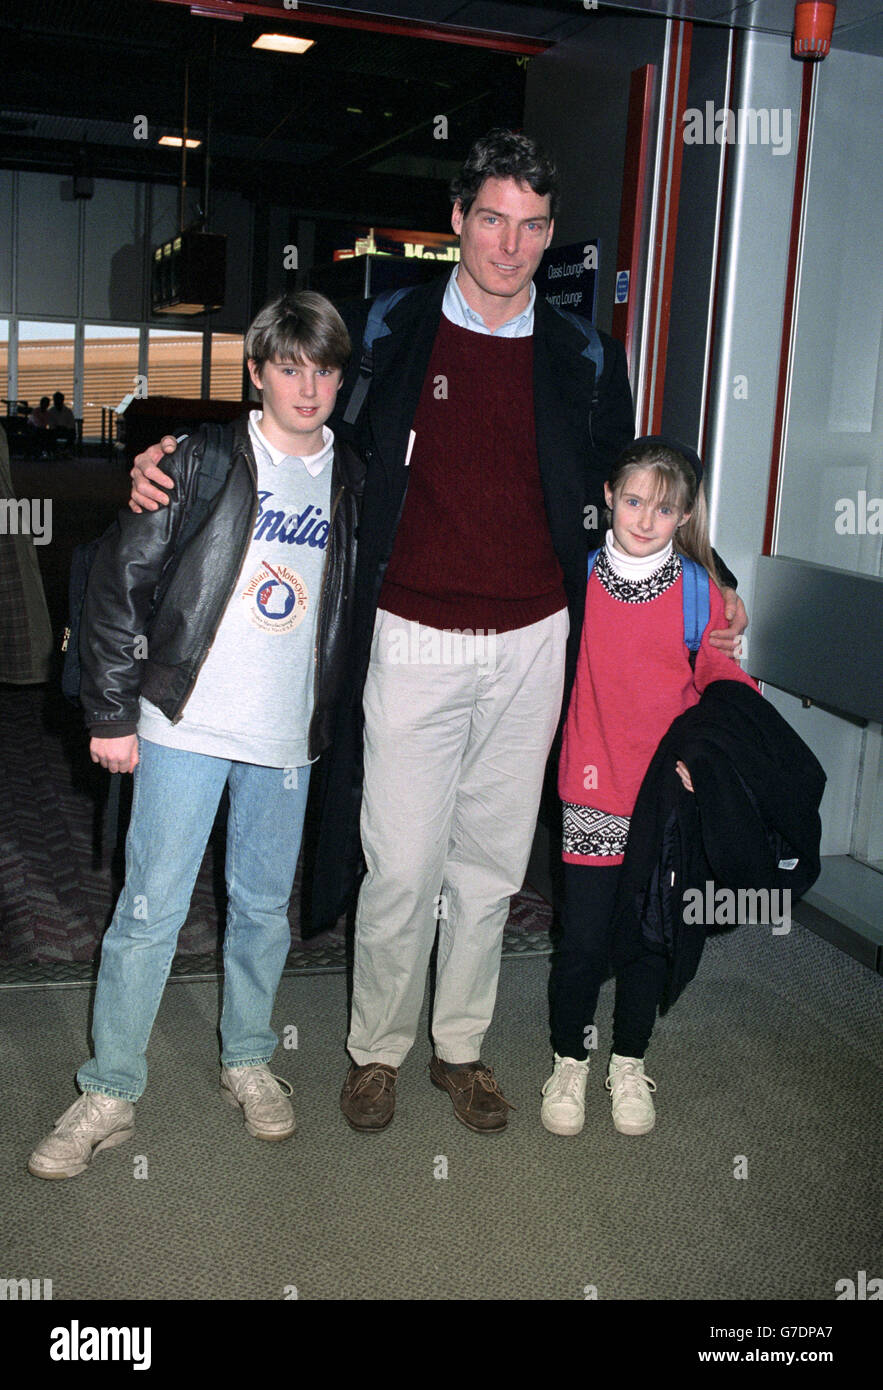 American actor Christopher Reeve, who played Superman, whith his two children Matthew and Alexandra at Heathrow Airport leaving to spend Christmas in New York. 11/10/04: Mr Reeve has died at the age of 52 after he fell into a coma on Saturday and went into cardiac arrest while at his New York home, he then died on Sunday, his publicist Wesley Combs has revealed. Reeve was paralysed from the shoulders down after a riding accident in 1995. Stock Photo